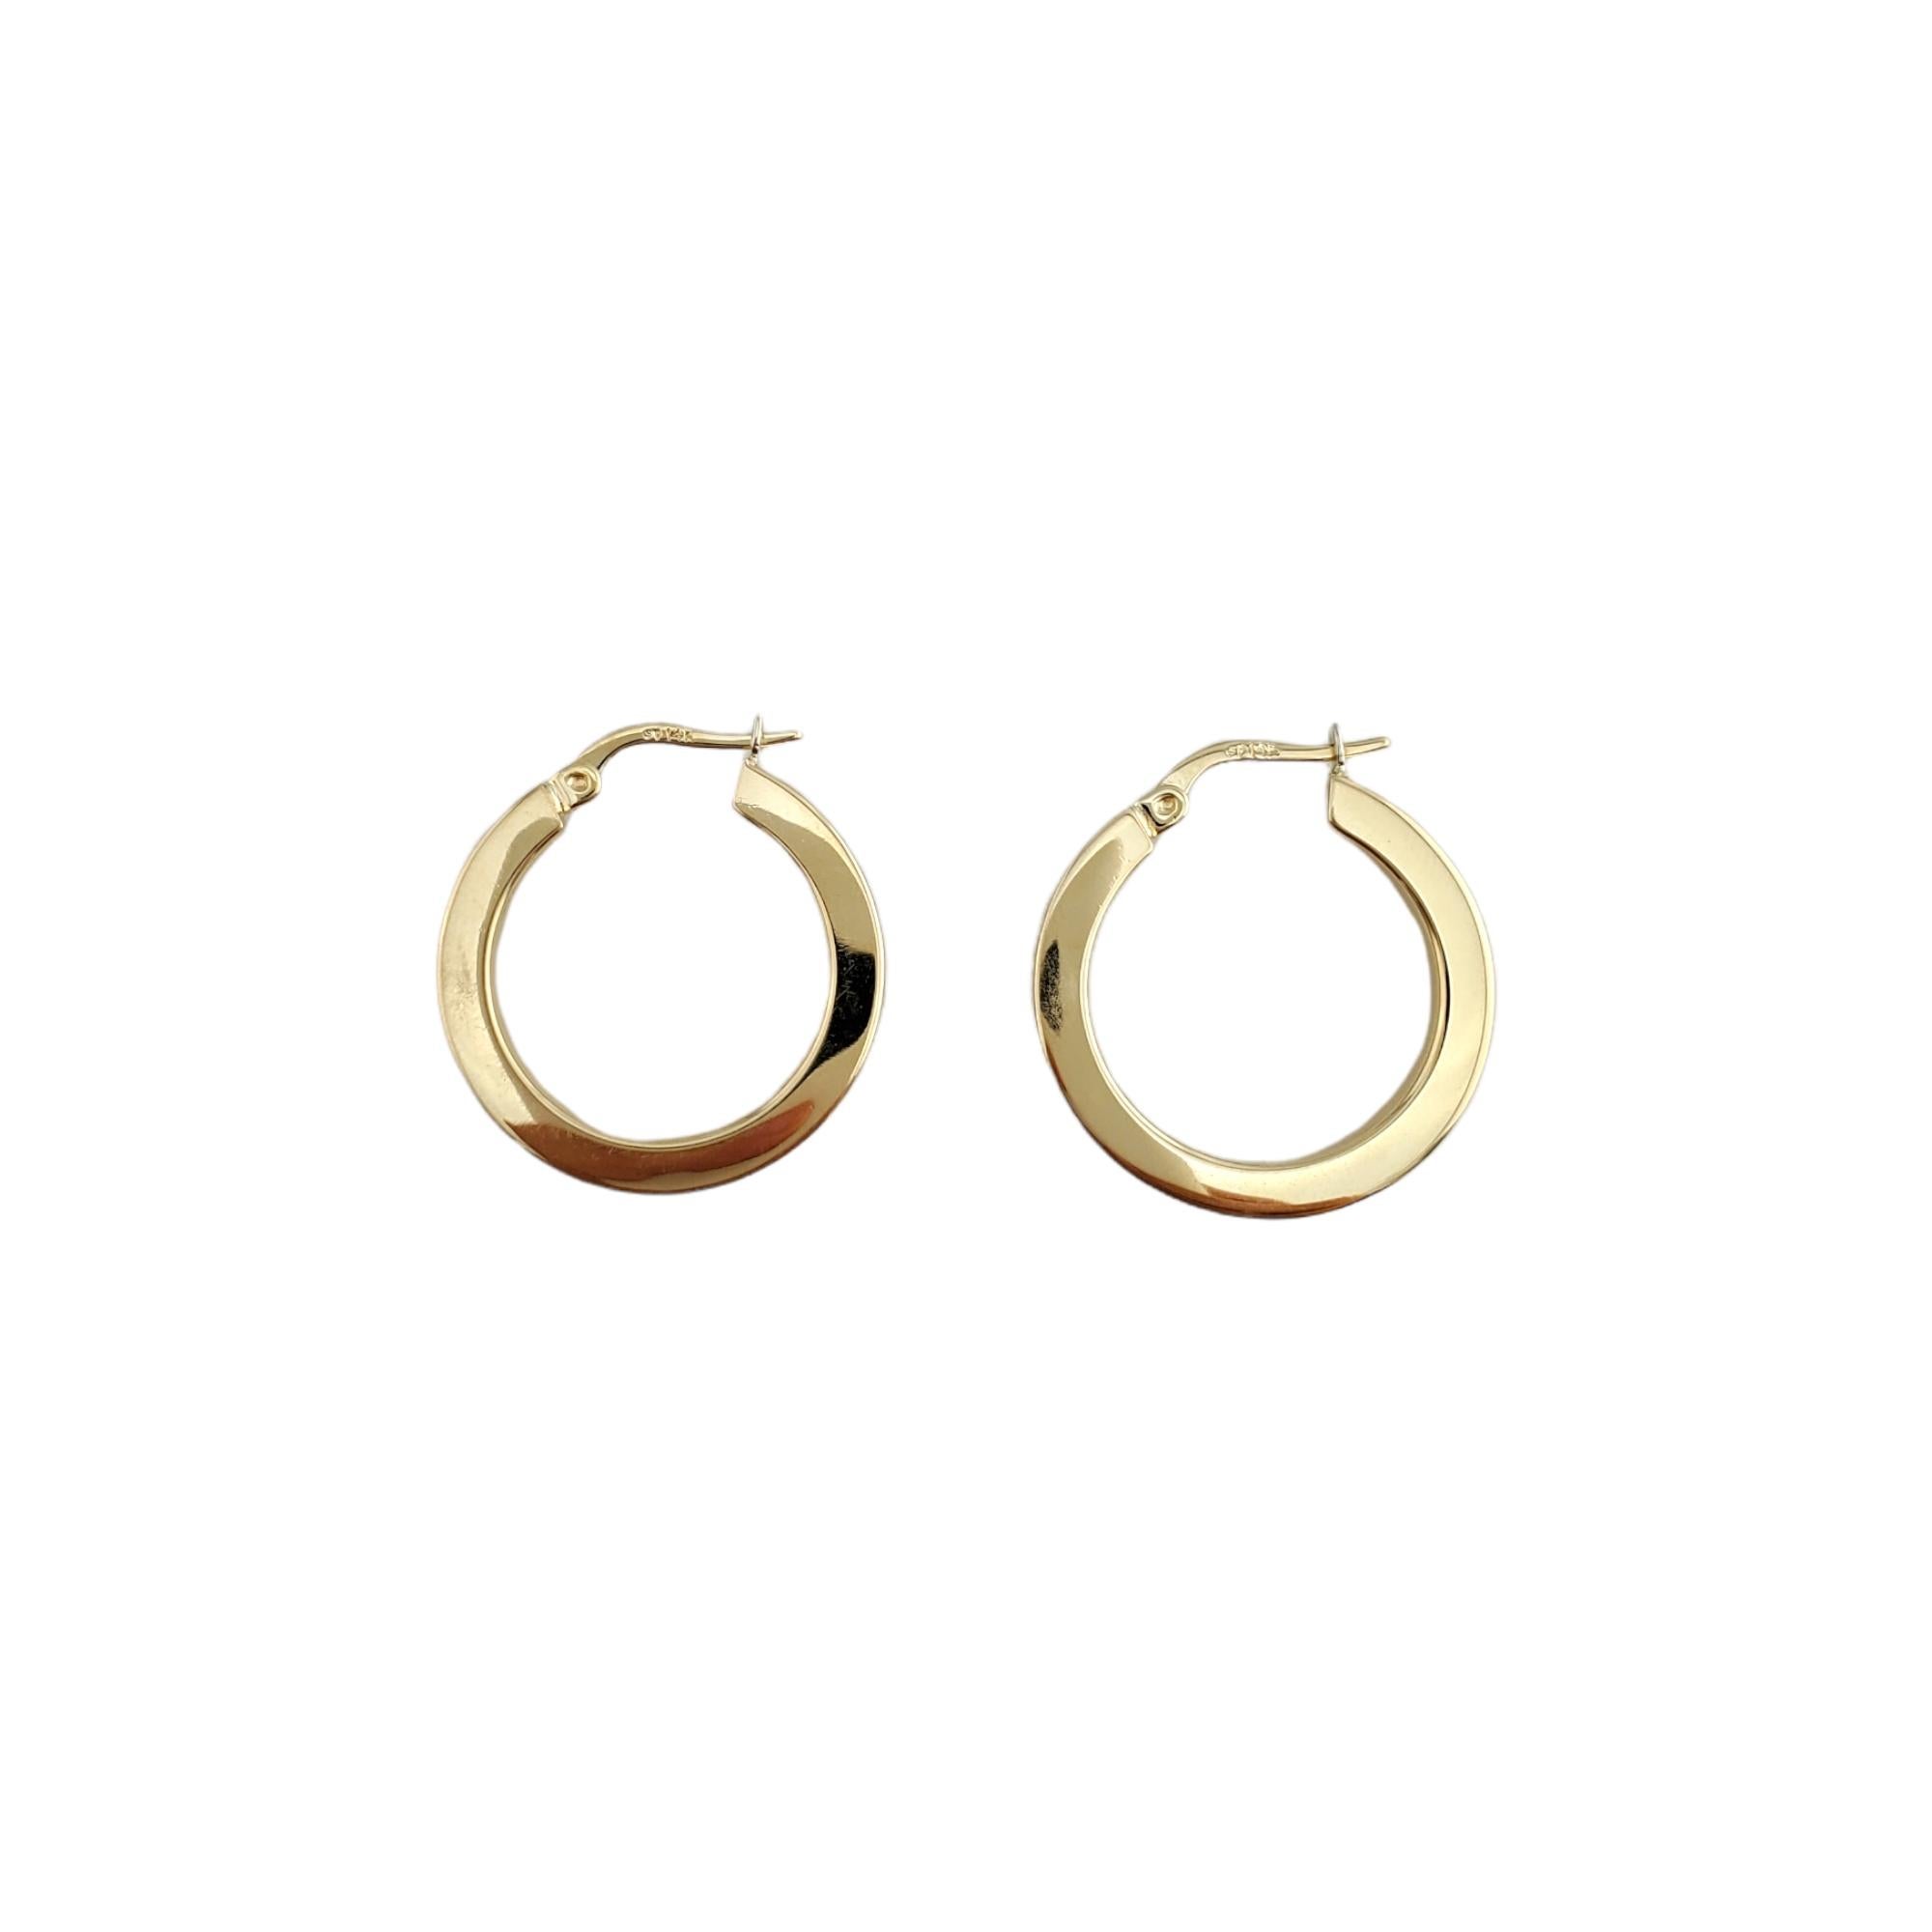 14K Yellow Gold Hoops

Gorgeous simple hoops in 14K yellow gold.

Size: 22.8 mm X 23.8 mm x 3mm

Weight: 3.1 g/ 1.9 dwt

Hallmark: 14K

Very good condition, professionally polished.

Will come packaged in a gift box and will be shipped U.S. Priority